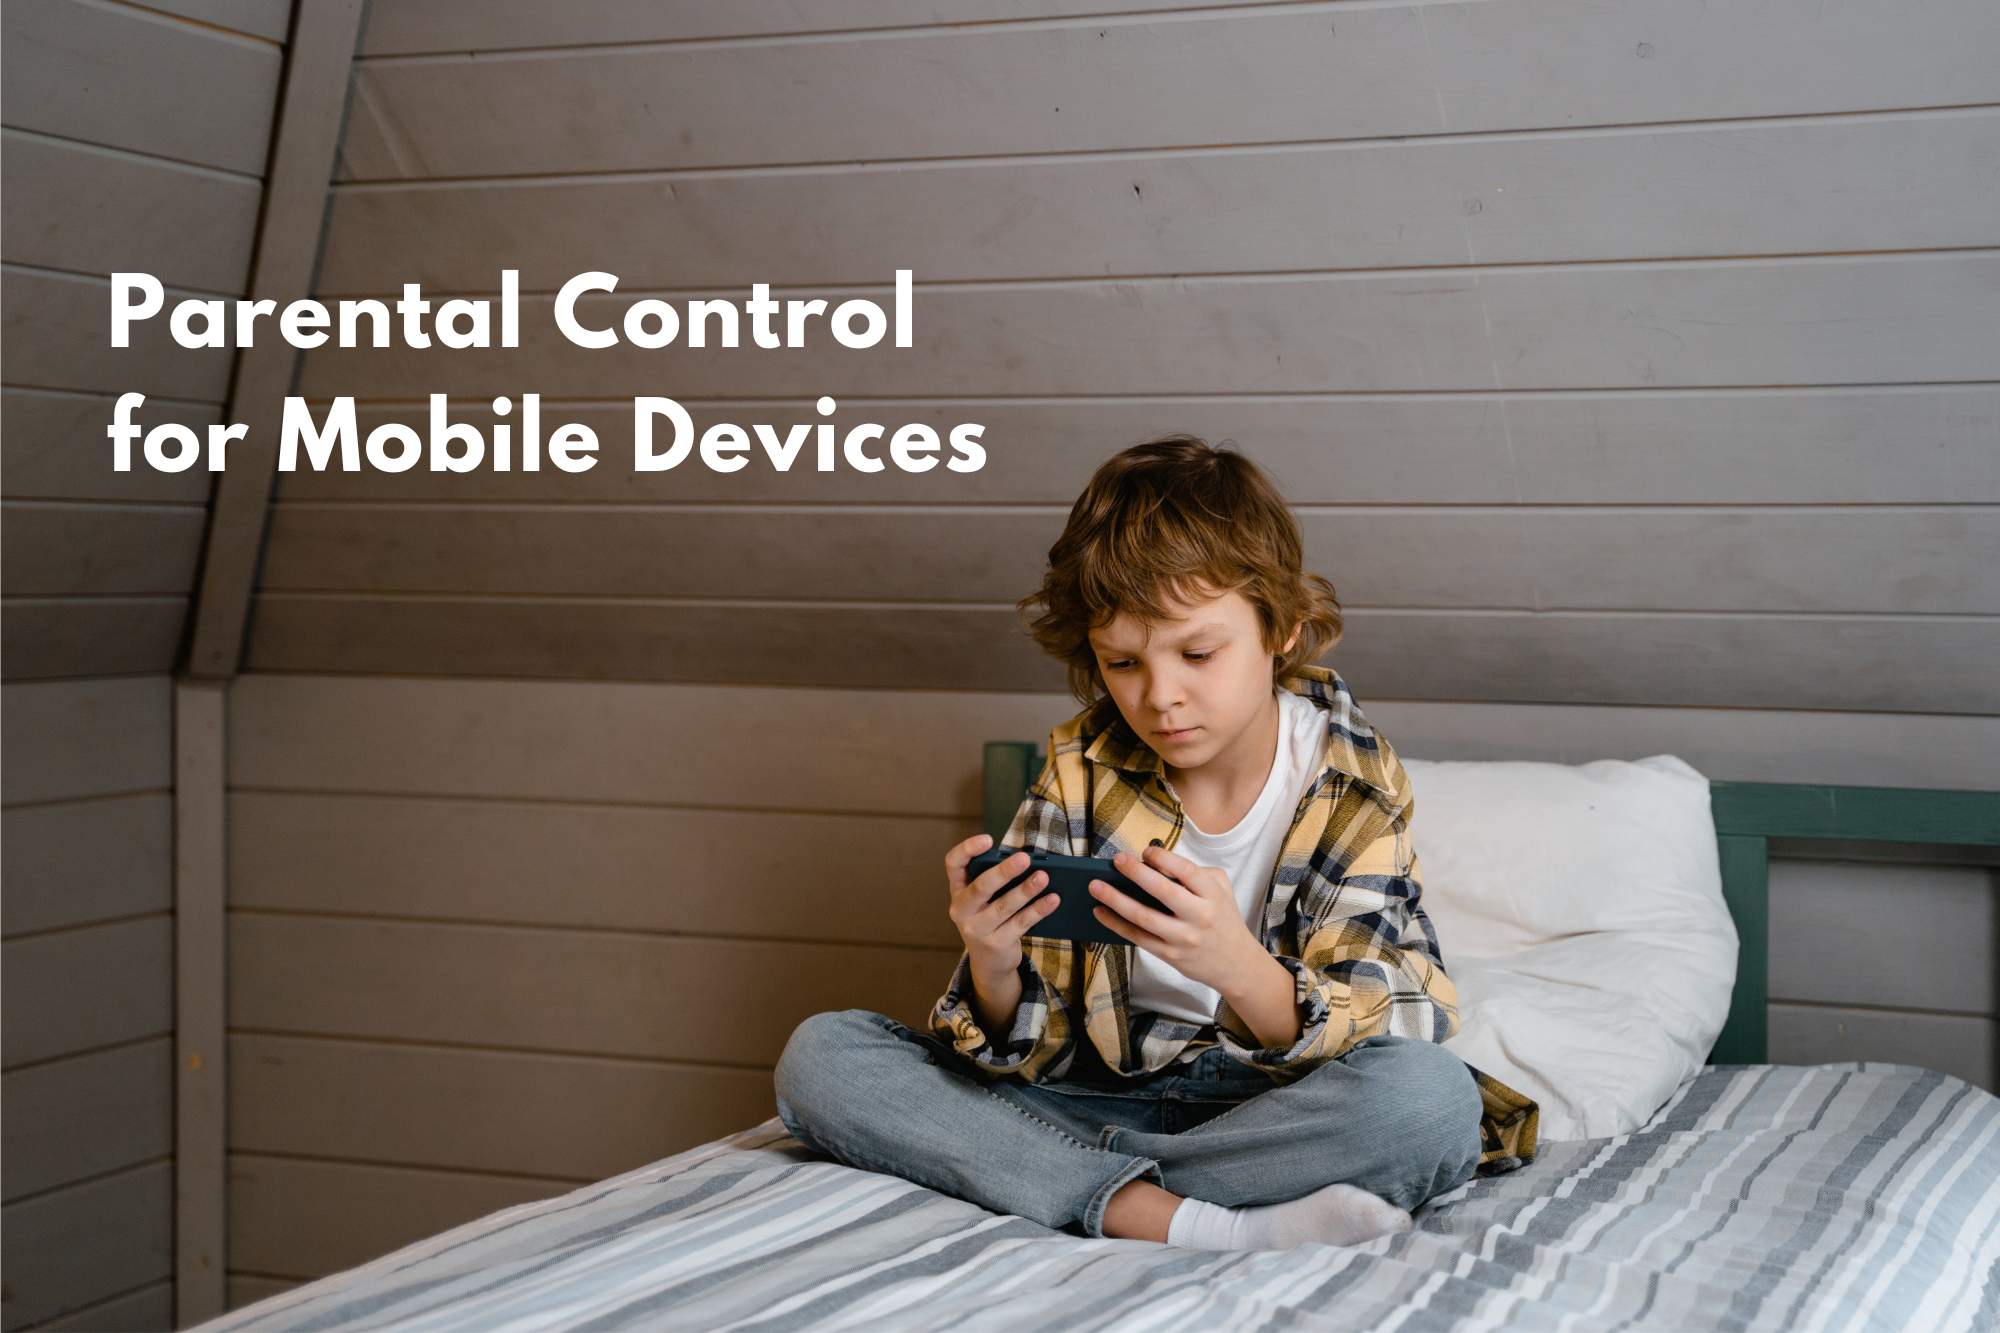 Parental Control for Mobile Devices: Tips and Best Practices